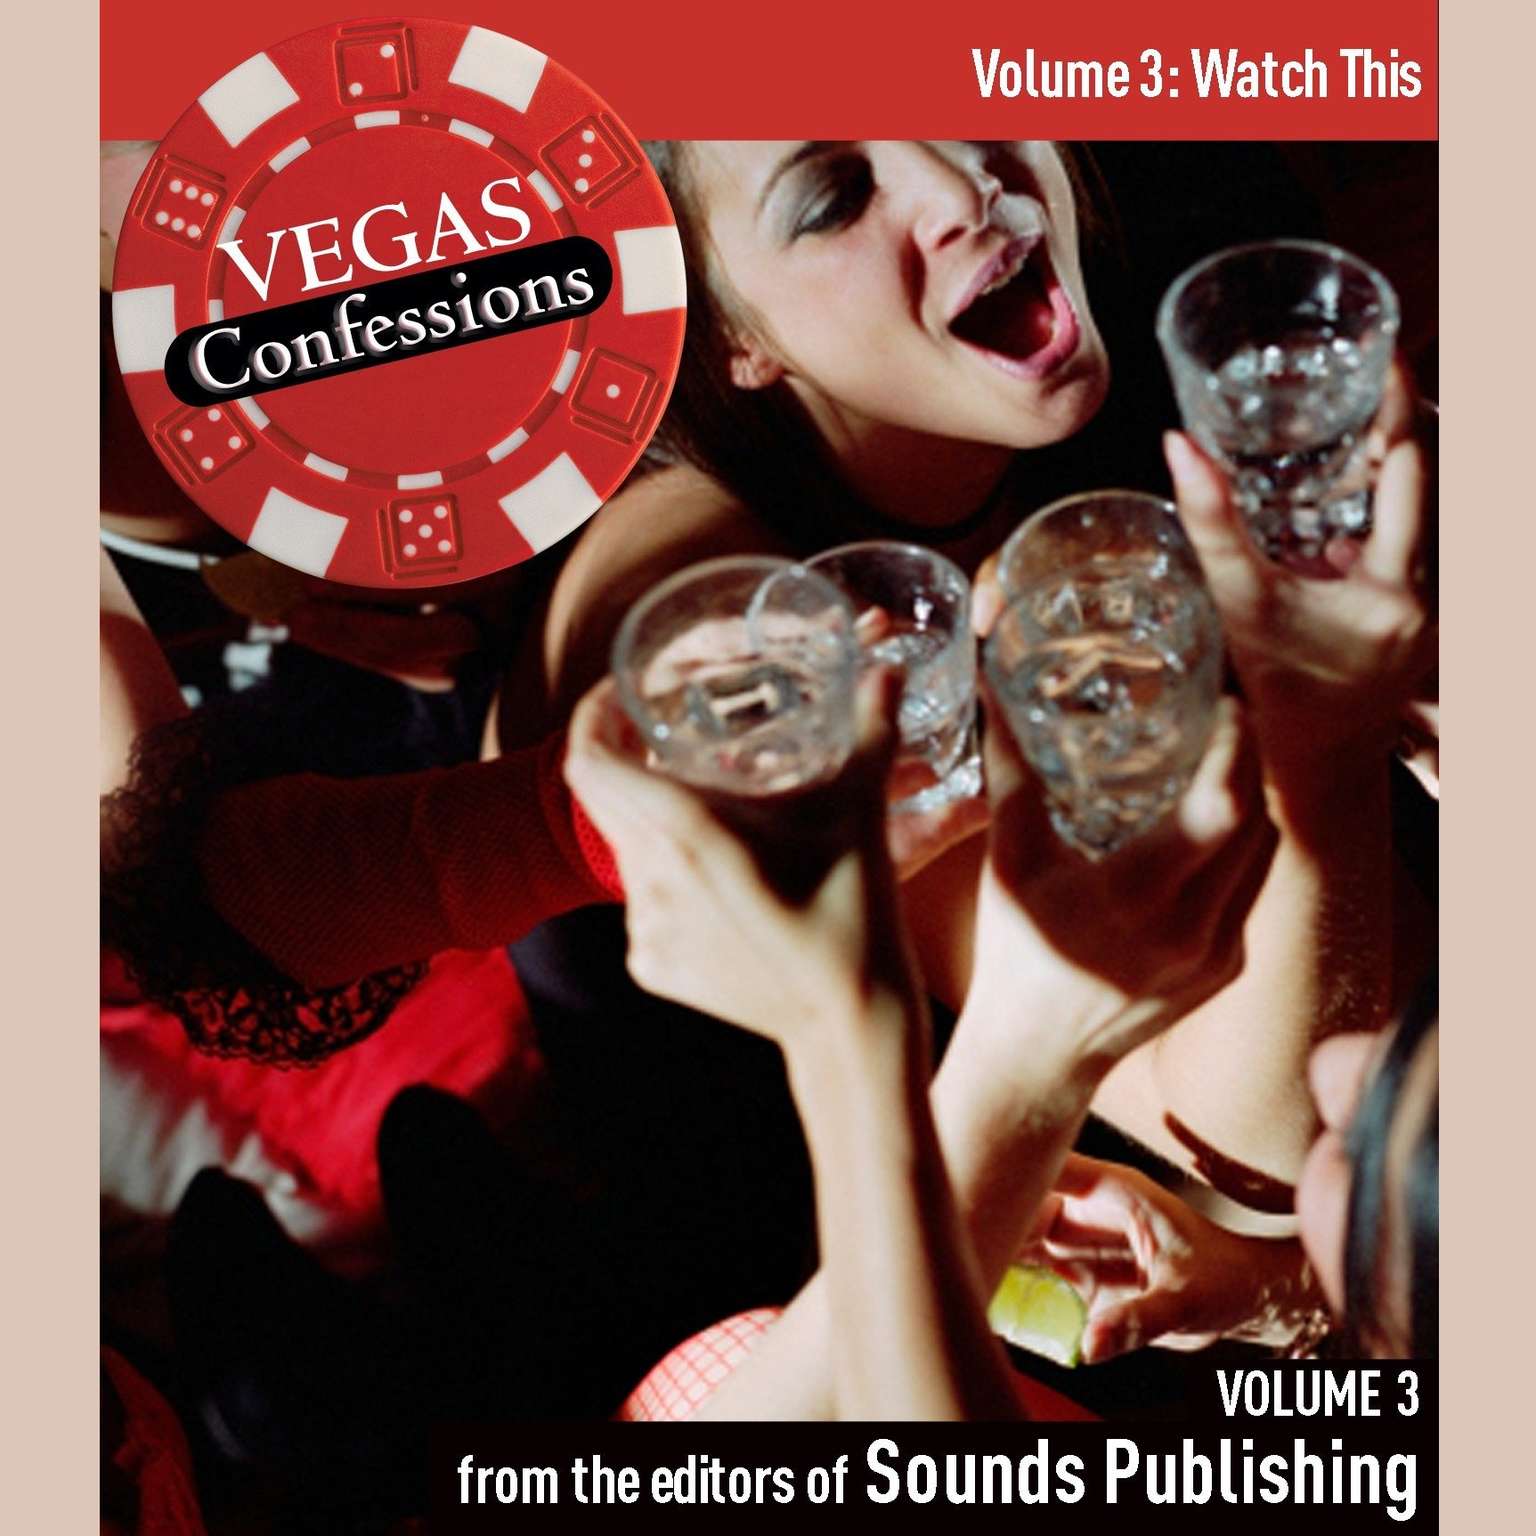 Vegas Confessions 3: Watch This Audiobook, by The Editors of Sounds Publishing